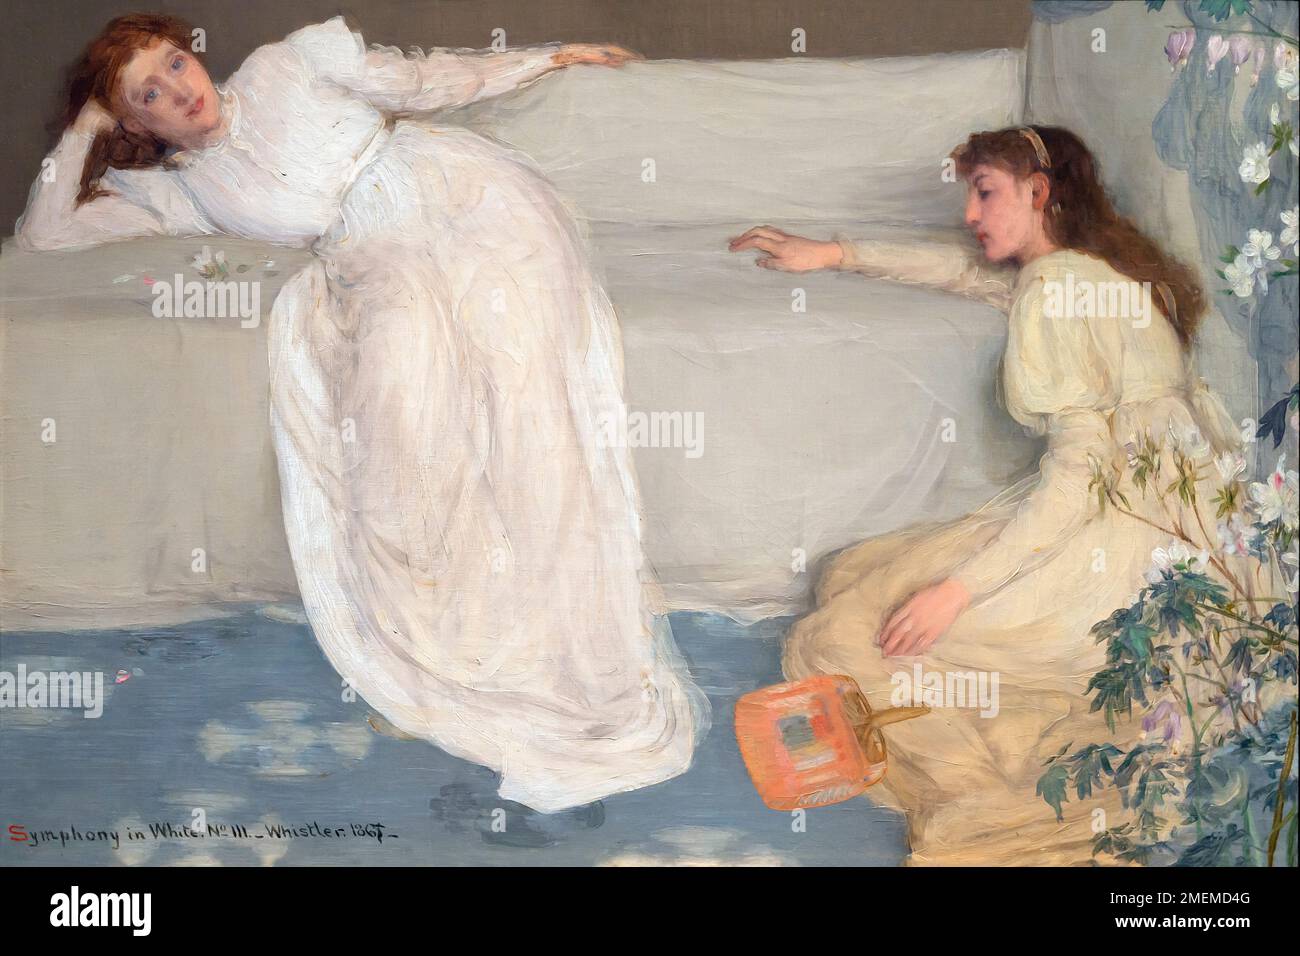 Symphony in White, No.3, James McNeill Whistler, 1865-1867, Stock Photo